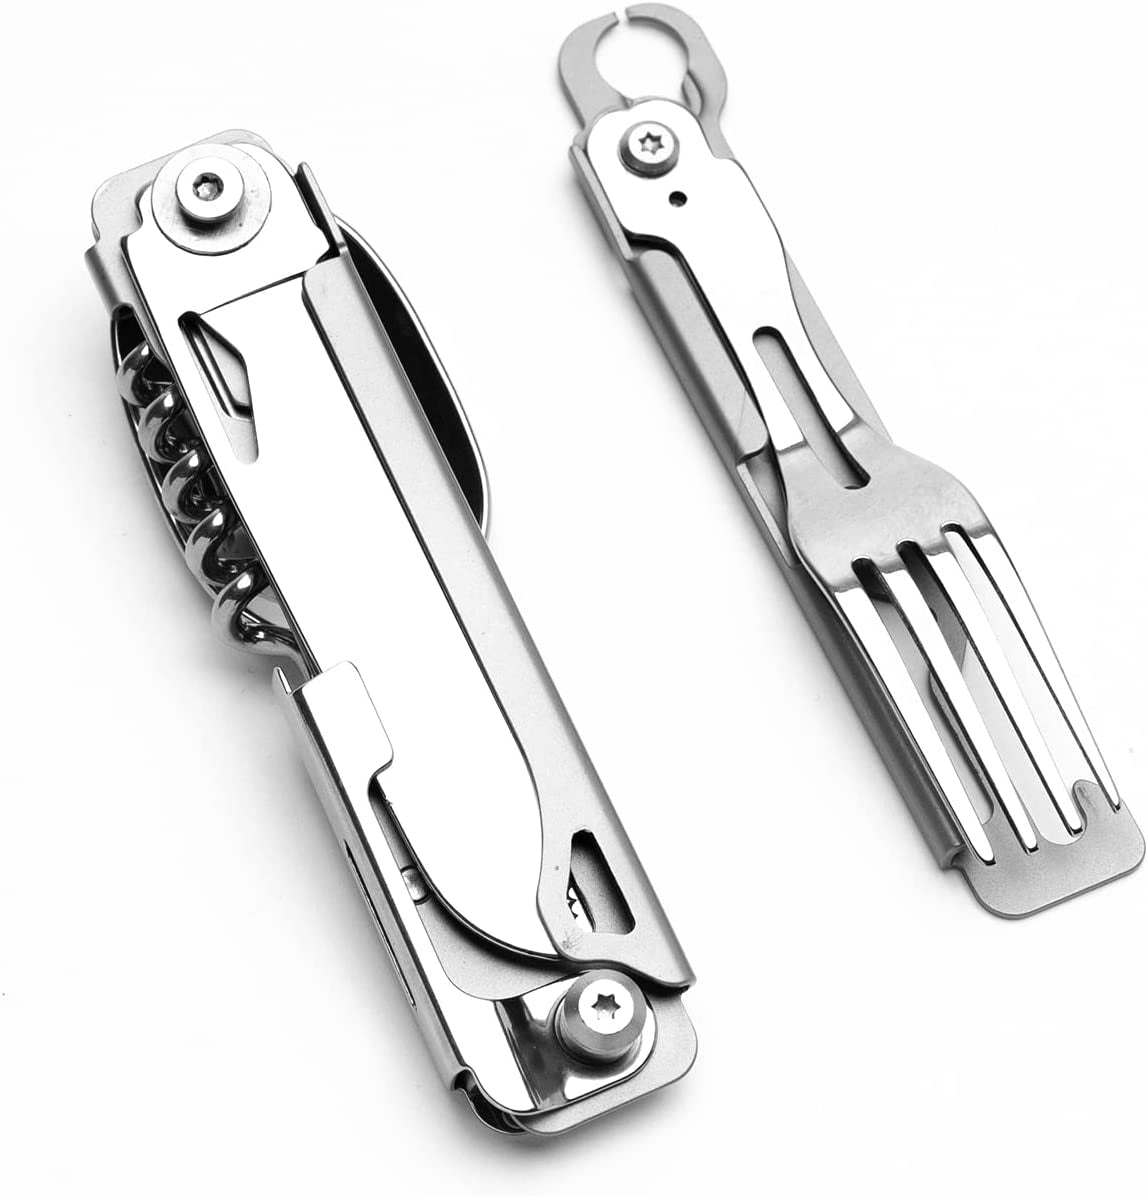 Camping Utensils - 4 in 1 Stainless Steel, Safety Locking Camping Accessories with Durable Sheath - Compact Multi Tool for Camping with Knive, Spoon, Fork, Bottle Opener by